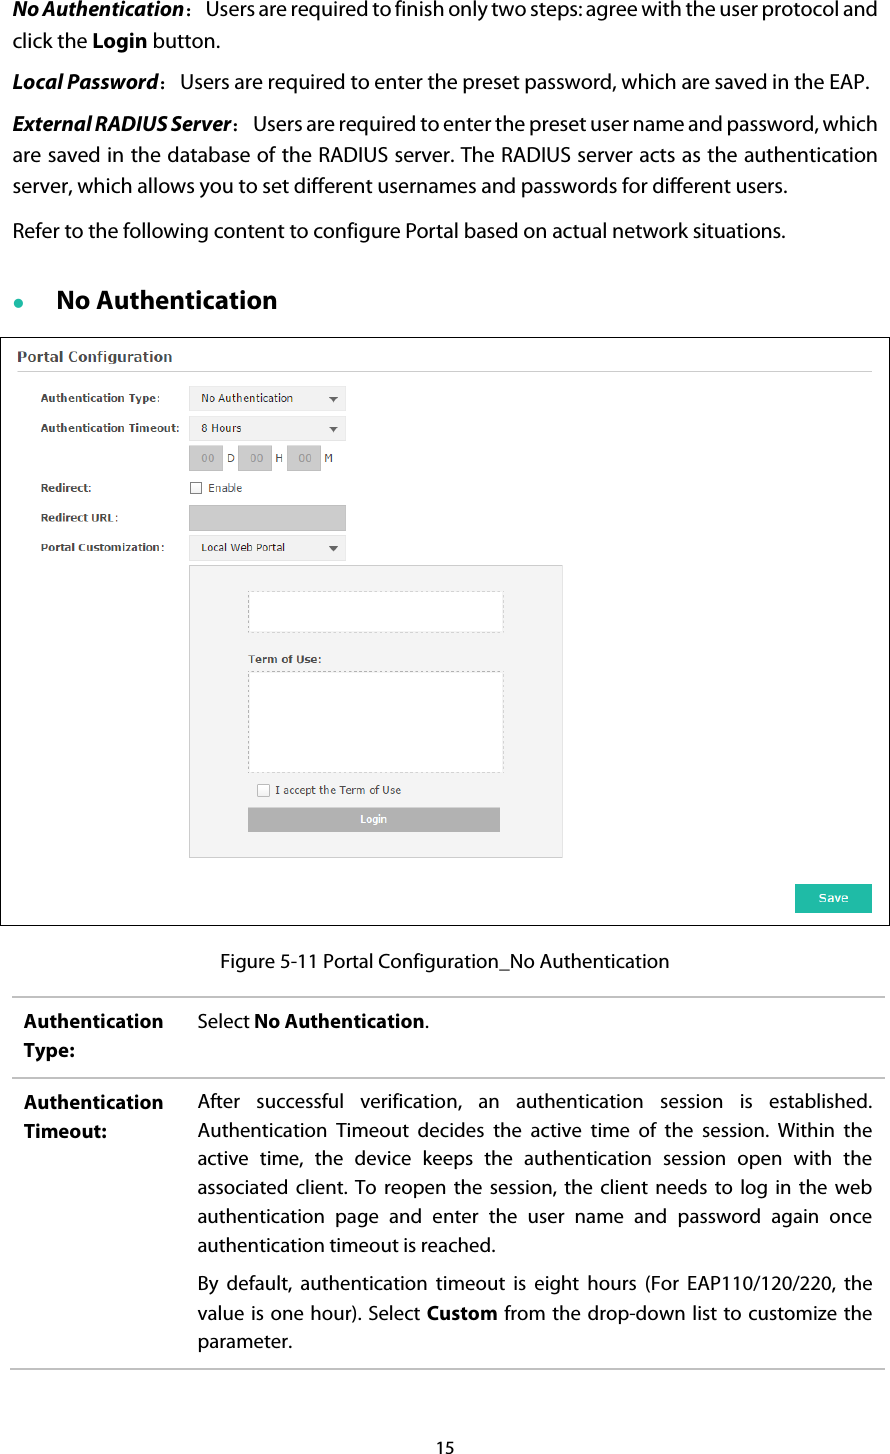 No Authentication：Users are required to finish only two steps: agree with the user protocol and click the Login button. Local Password：Users are required to enter the preset password, which are saved in the EAP. External RADIUS Server：Users are required to enter the preset user name and password, which are saved in the database of the RADIUS server. The RADIUS server acts as the authentication server, which allows you to set different usernames and passwords for different users. Refer to the following content to configure Portal based on actual network situations.  No Authentication  Figure 5-11 Portal Configuration_No Authentication Authentication Type: Select No Authentication. Authentication Timeout: After  successful verification, an authentication session is established. Authentication Timeout decides the active time of the session. Within the active time, the device keeps the authentication session open with the associated client. To reopen the session, the client needs to log in the web authentication page and enter the user name and password again once authentication timeout is reached. By default, authentication timeout is eight hours  (For EAP110/120/220, the value is one hour). Select Custom from the drop-down list to customize the parameter.   15  